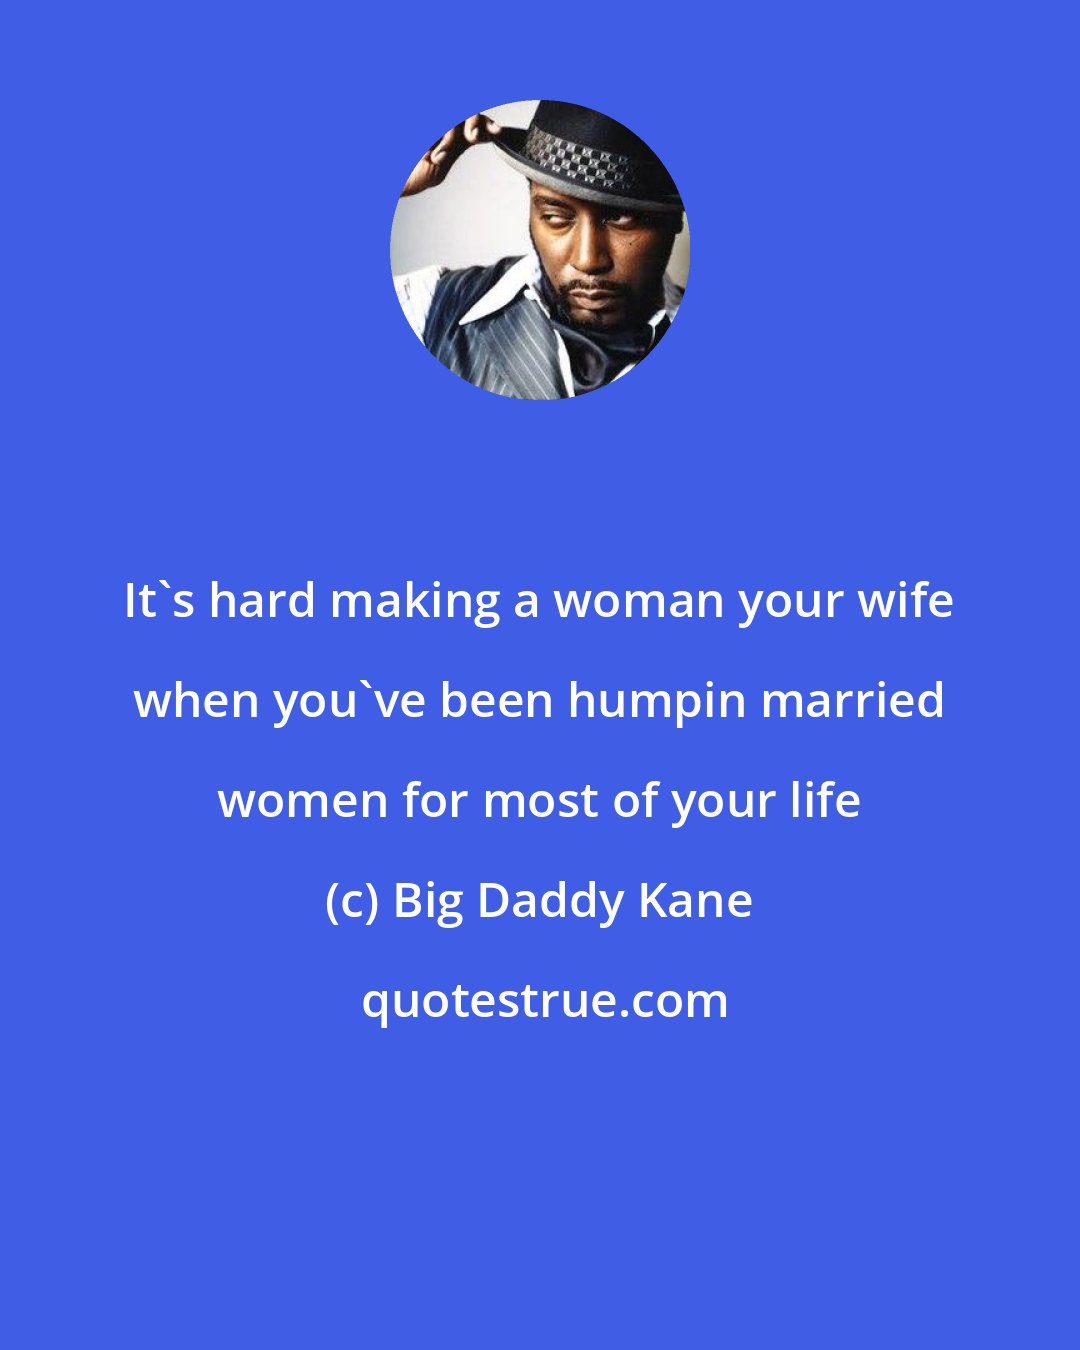 Big Daddy Kane: It's hard making a woman your wife when you've been humpin married women for most of your life